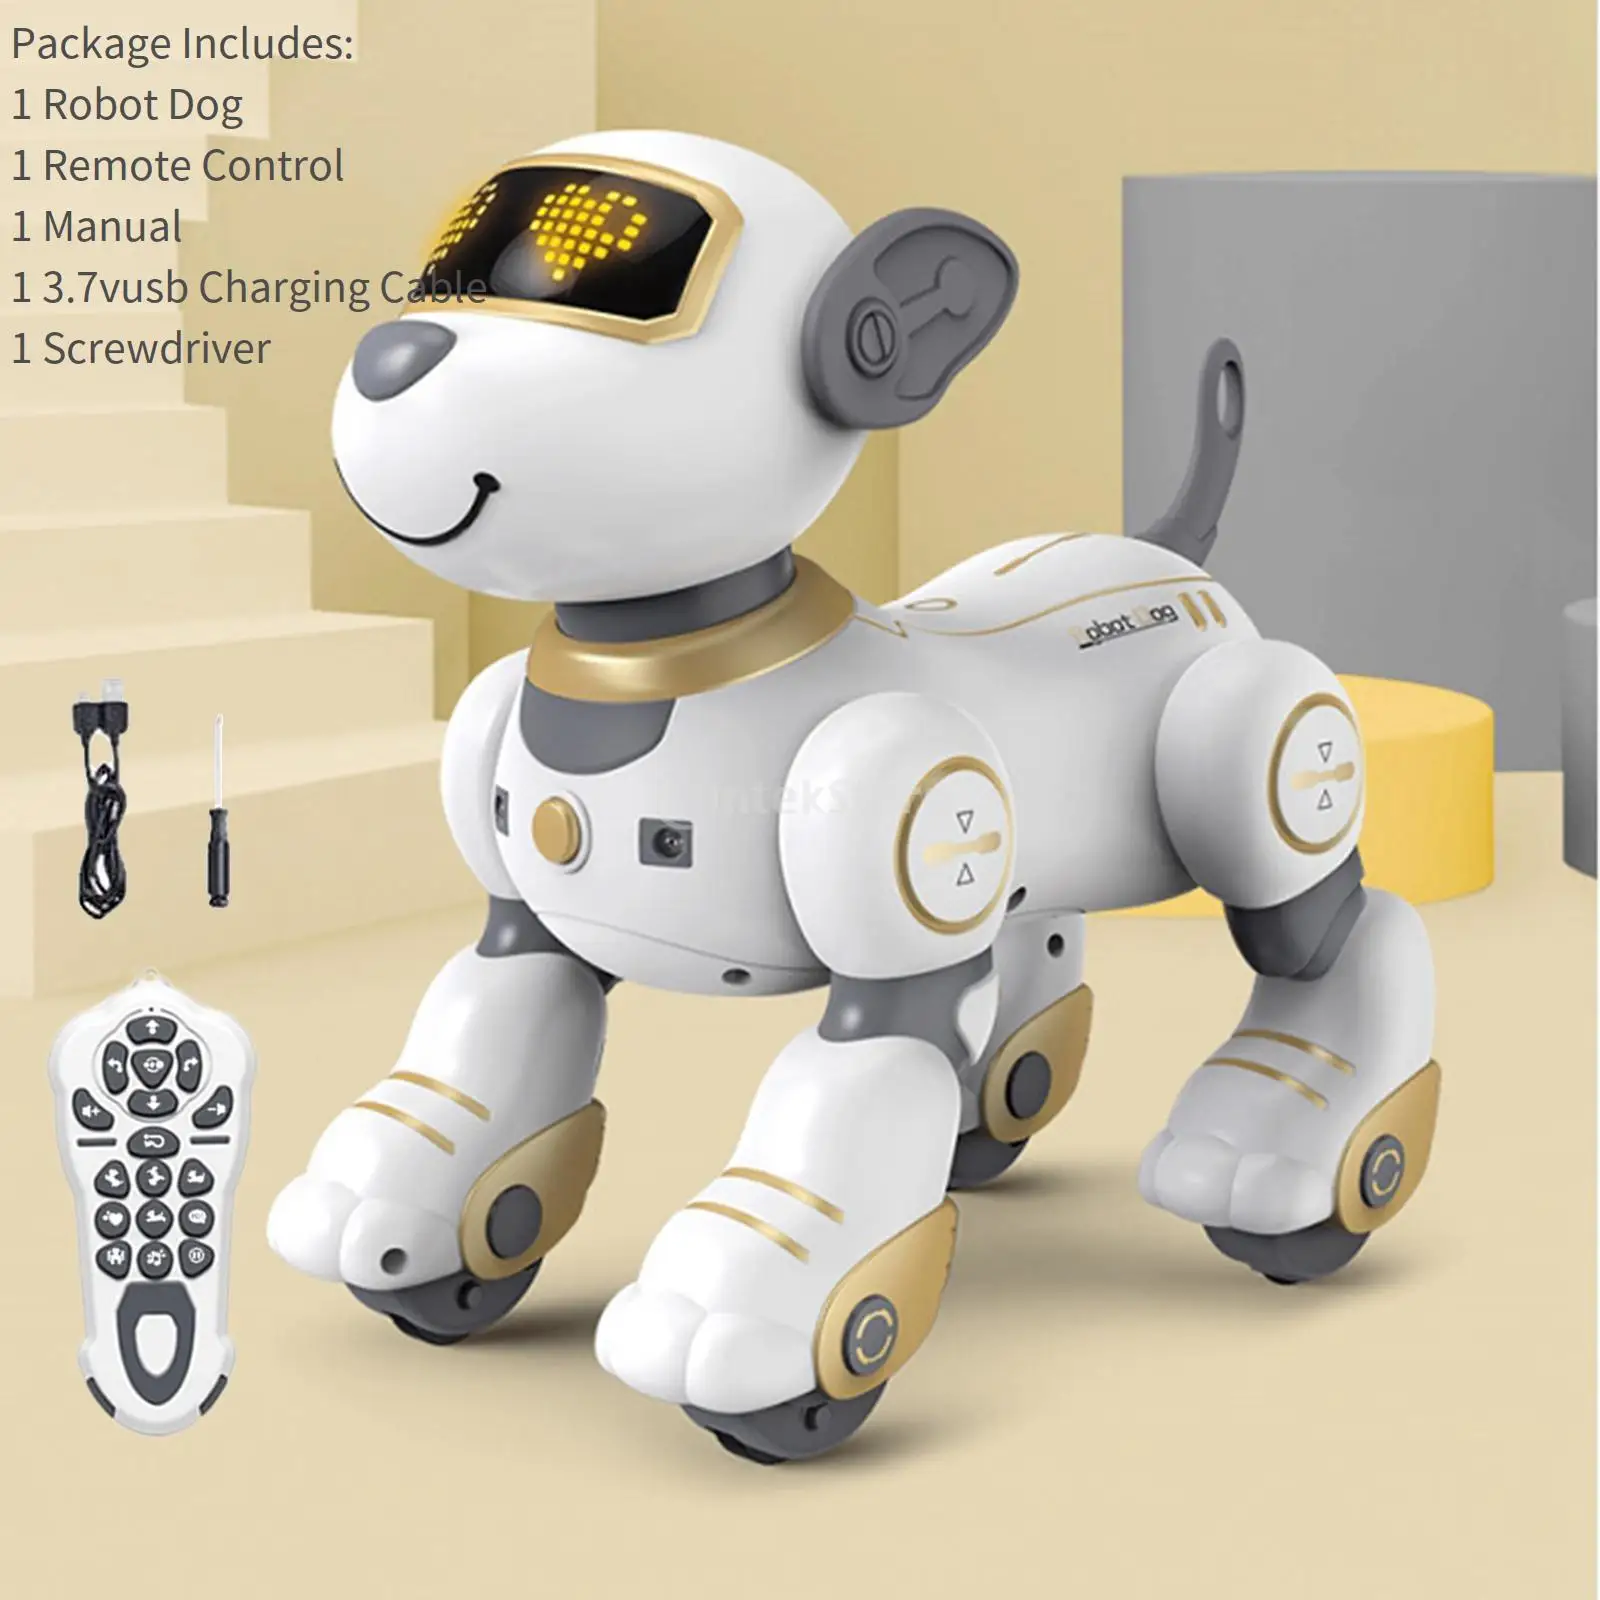 https://ae01.alicdn.com/kf/S69c483b8339e40a8a7a11c54b4c74464E/Robot-Dog-Toy-Toys-Electronic-Pet-Remote-Control-Pet-Magic-Pet-Dog-Toy-for-Kids-Boys.jpg